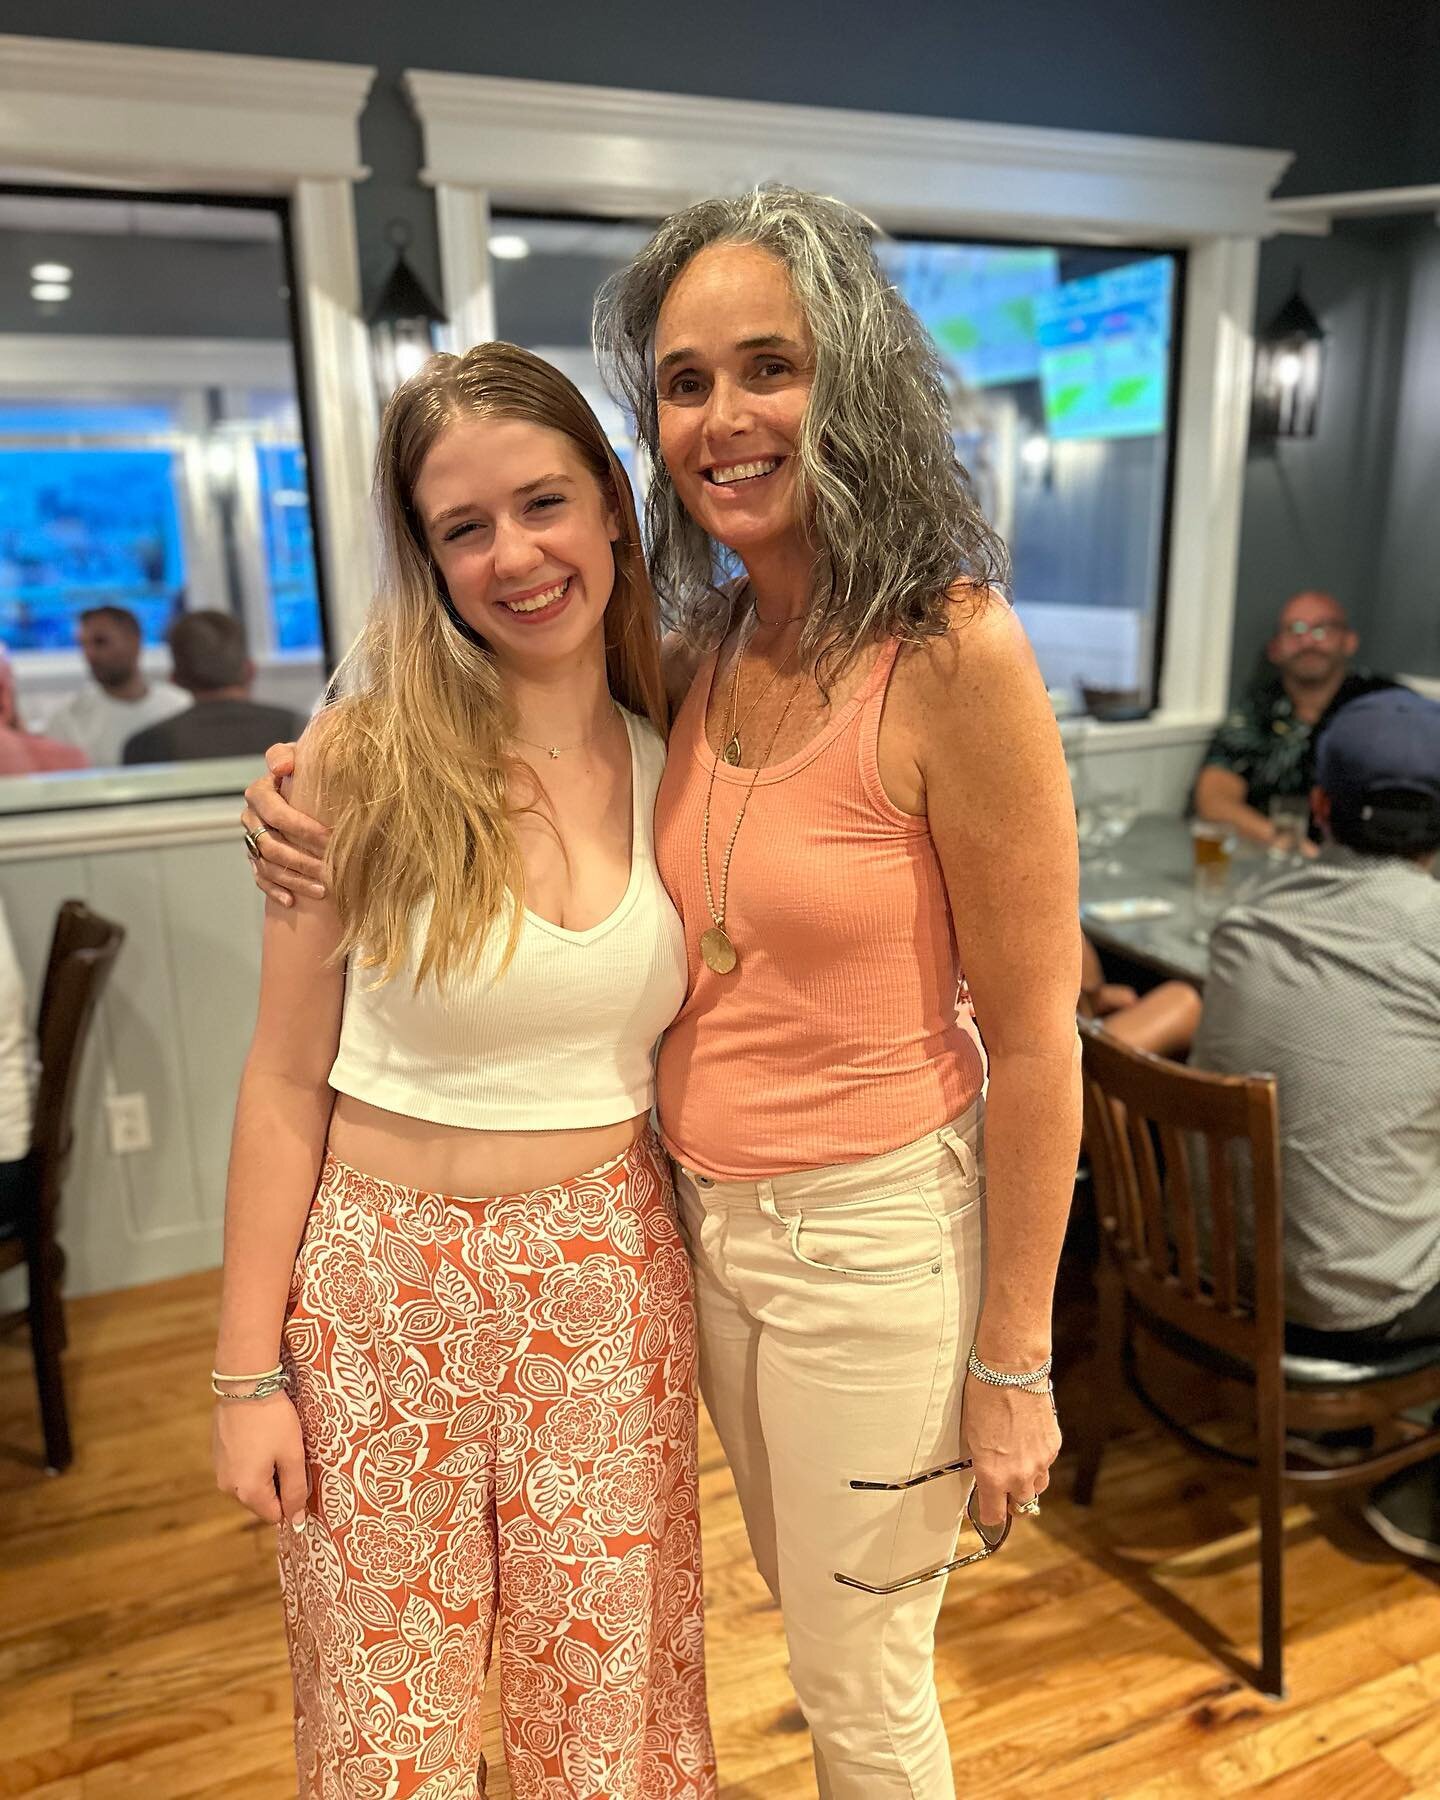 &hellip;there&rsquo;s always a smile to greet you at Fins &amp; Forks!! 
Lilah &amp; Mary-Anne
☀️🌊
#hamptonbays #eastend #hamptonsdining #Southampton #westhampton #hbvibes #beachvibes